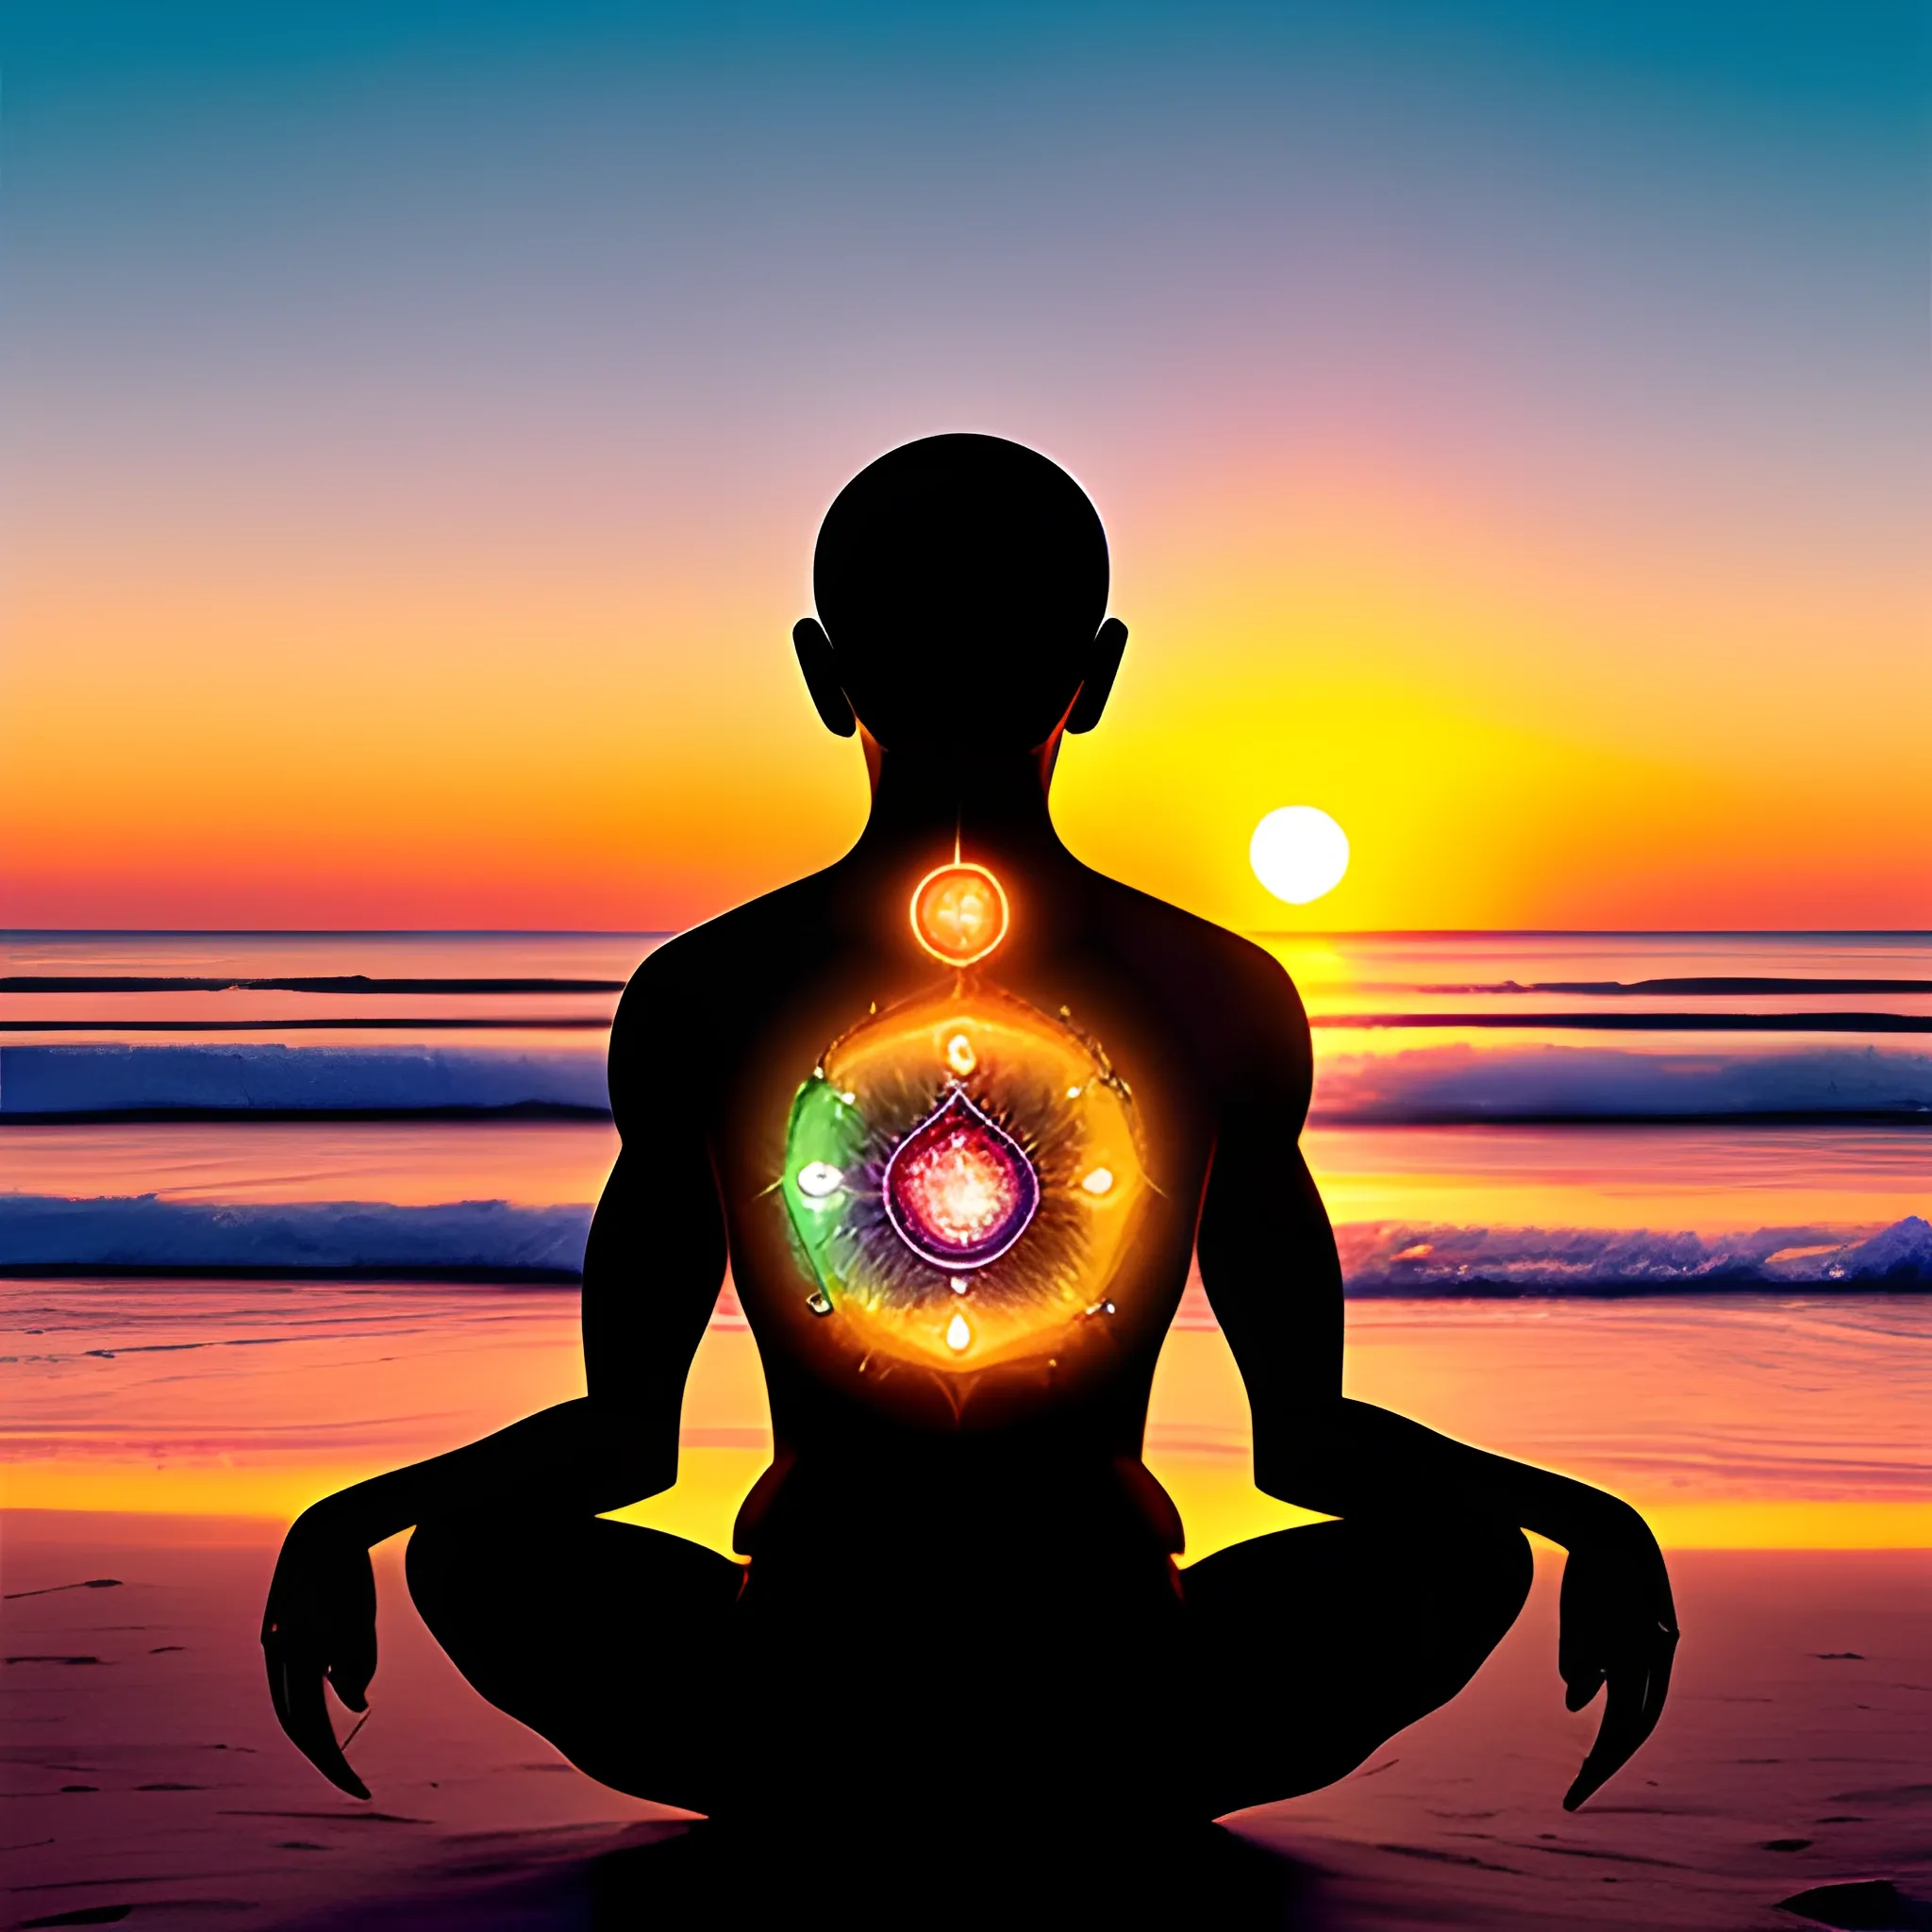 human being with the seven chakras, beach, sunset, universe, moon, caduceus
